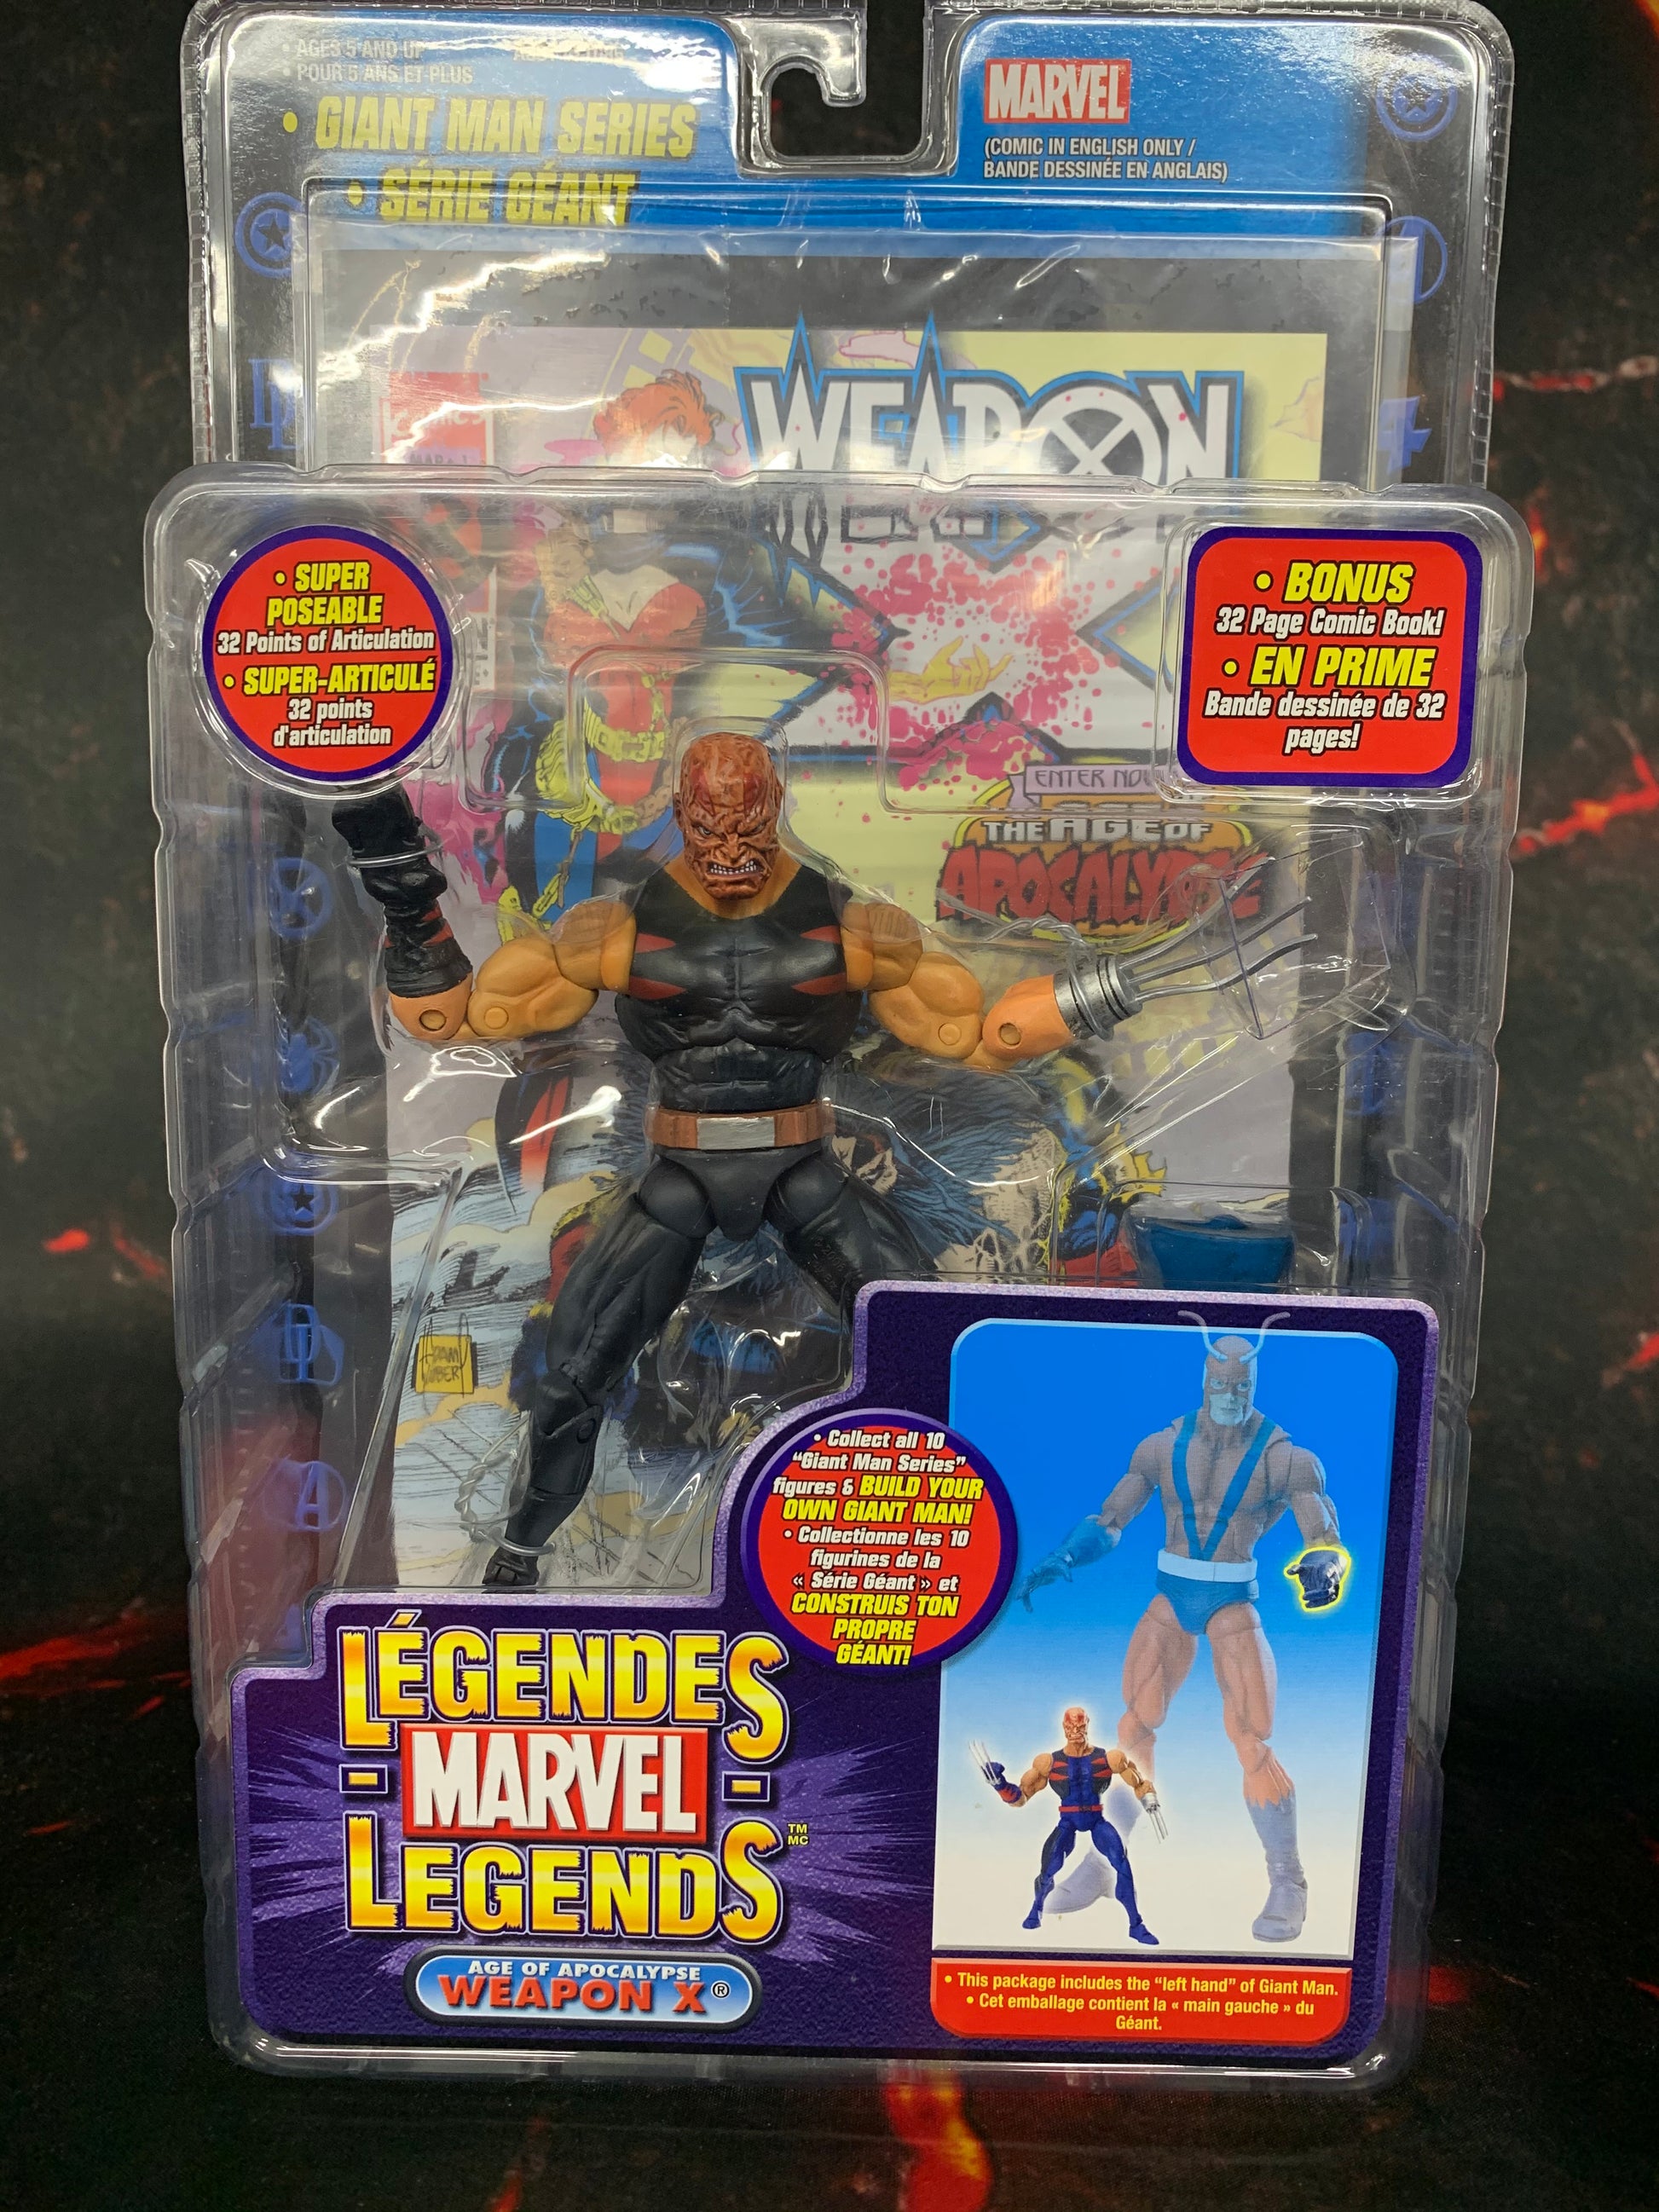 Marvel Legends Giant Man Series Weapon X Figure - Action Figure - The Hooded Goblin